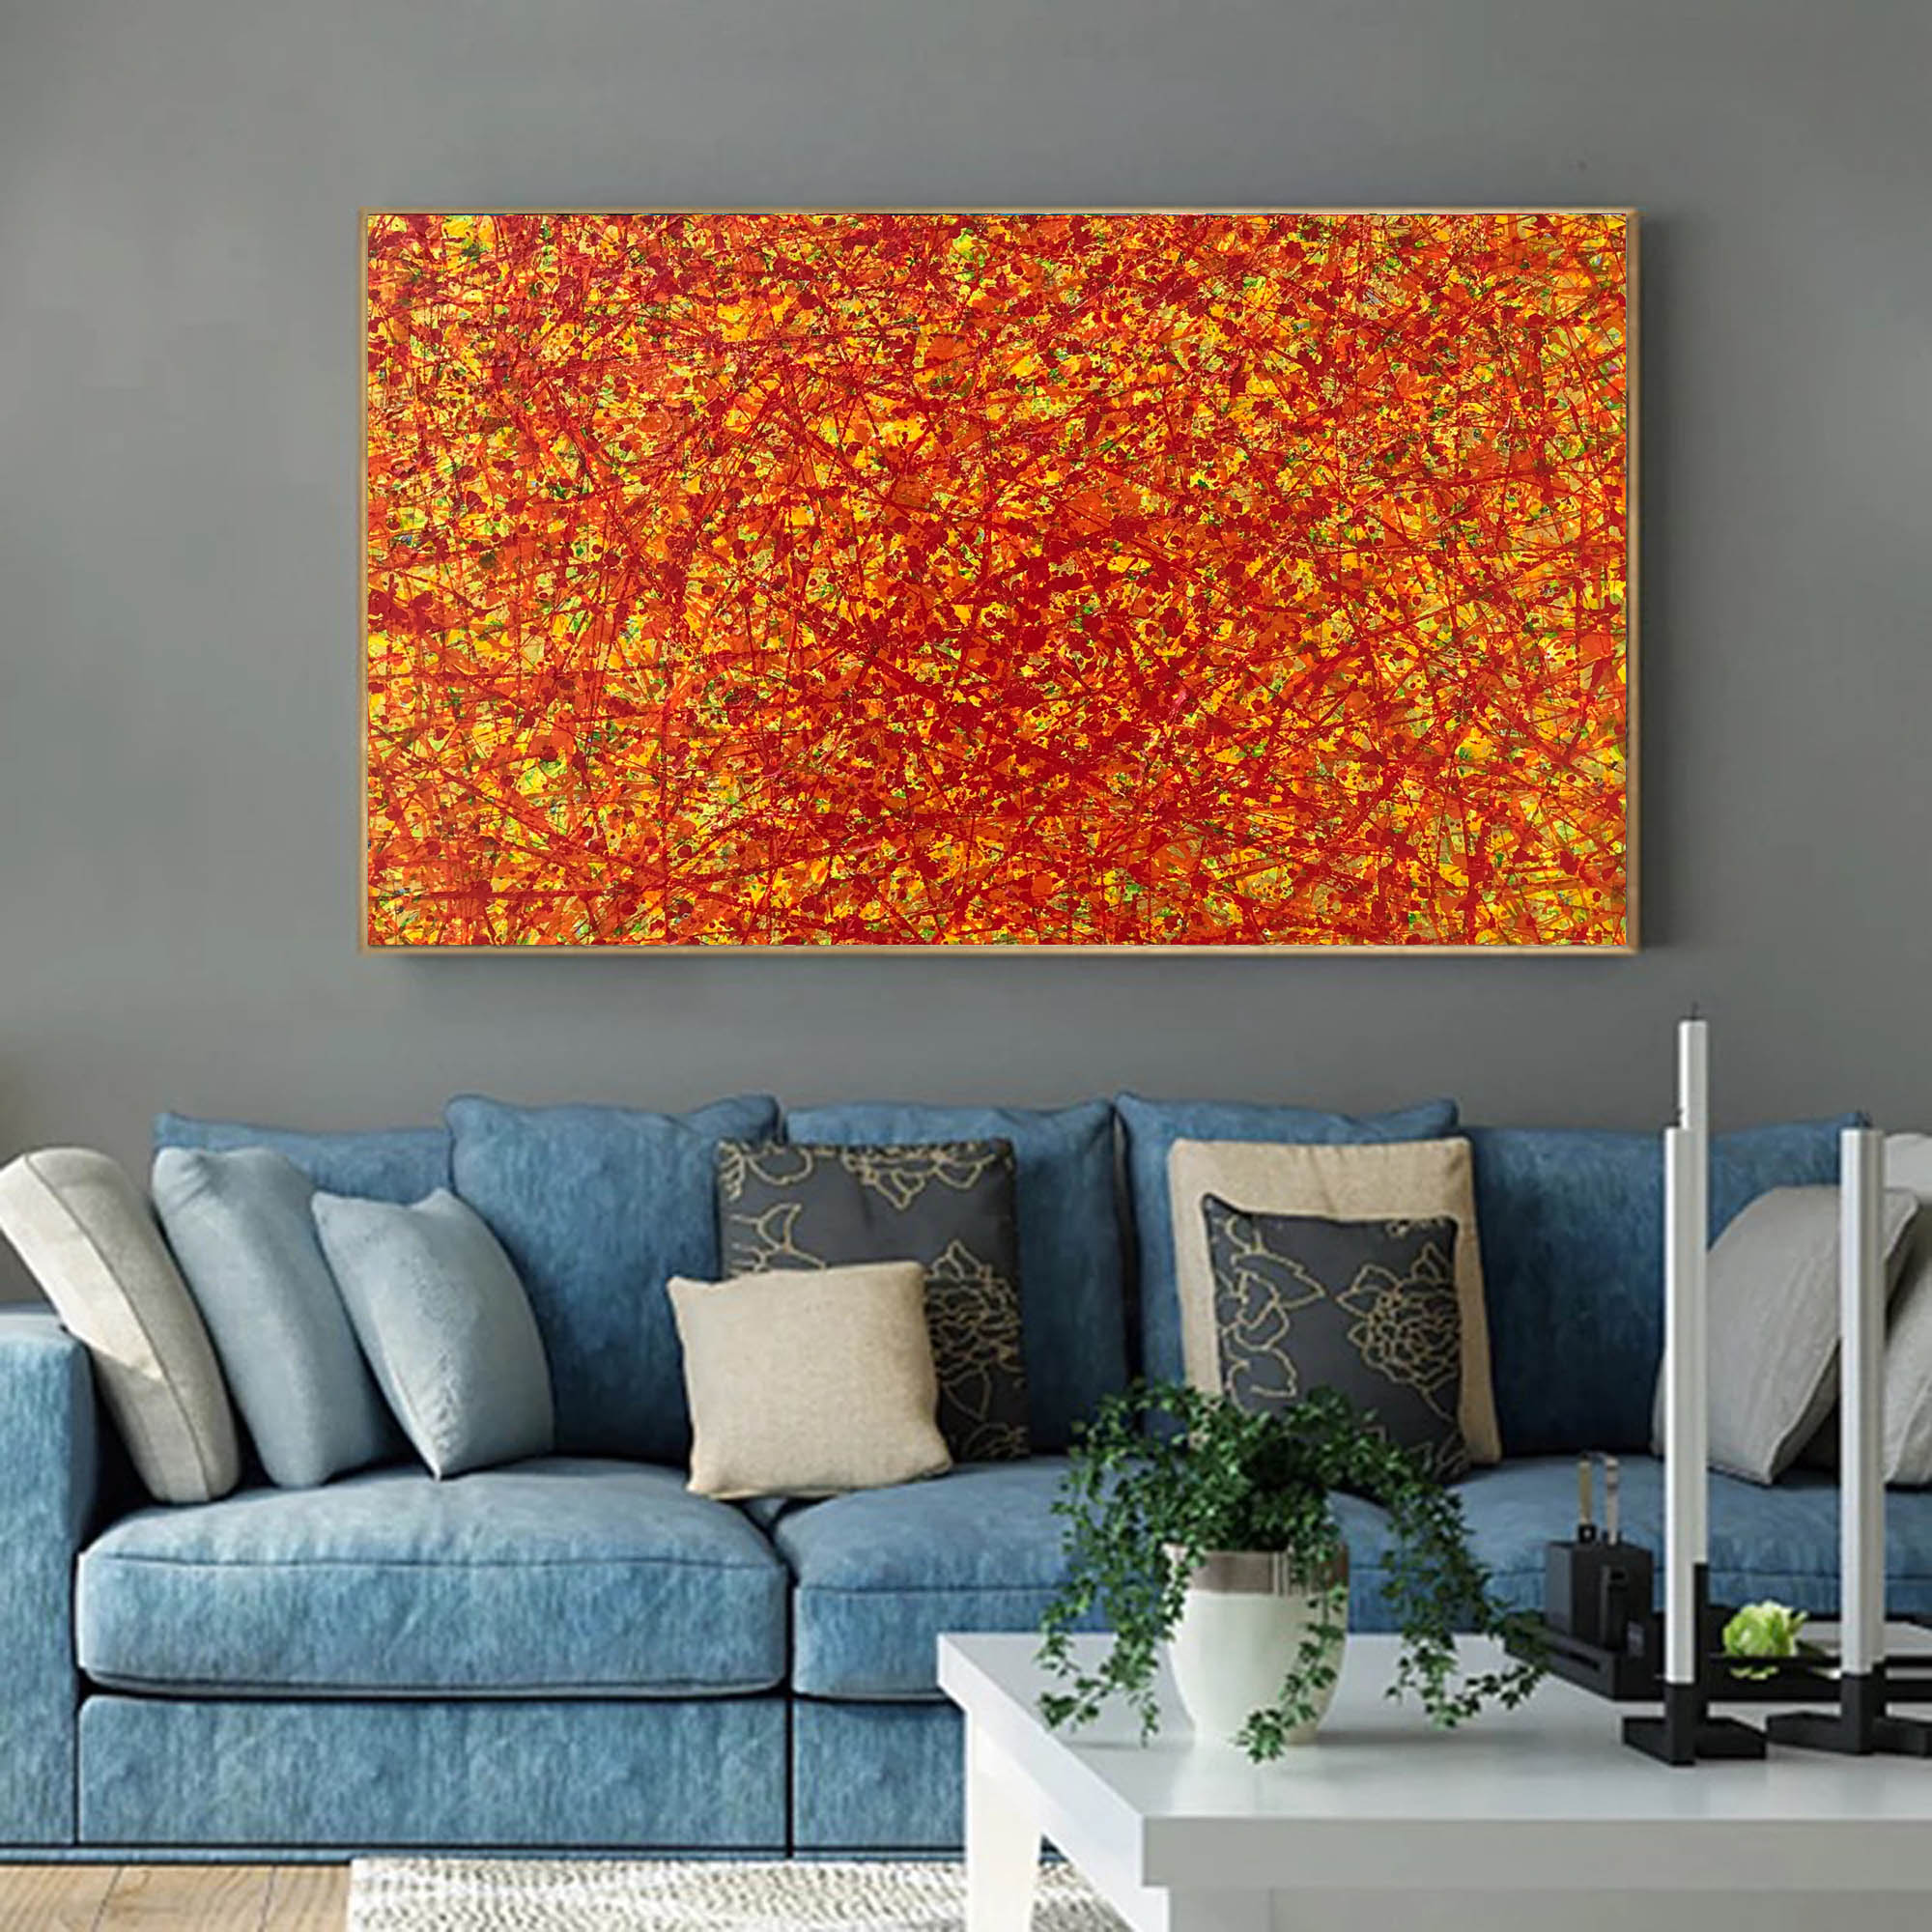 red abstract art | large original art | oversized oil paintings for sa ...